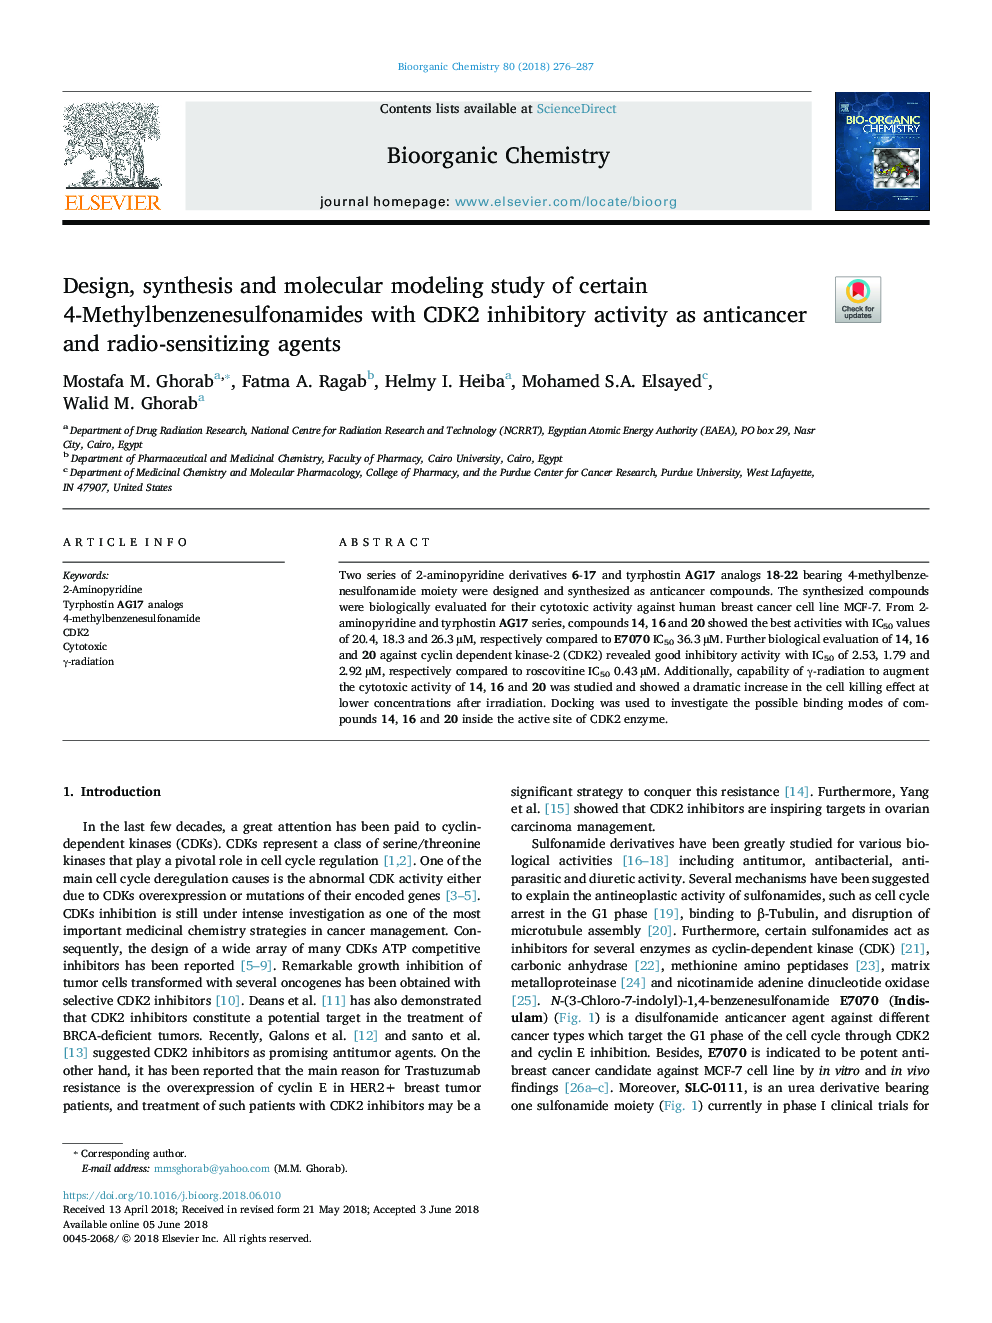 Design, synthesis and molecular modeling study of certain 4-Methylbenzenesulfonamides with CDK2 inhibitory activity as anticancer and radio-sensitizing agents